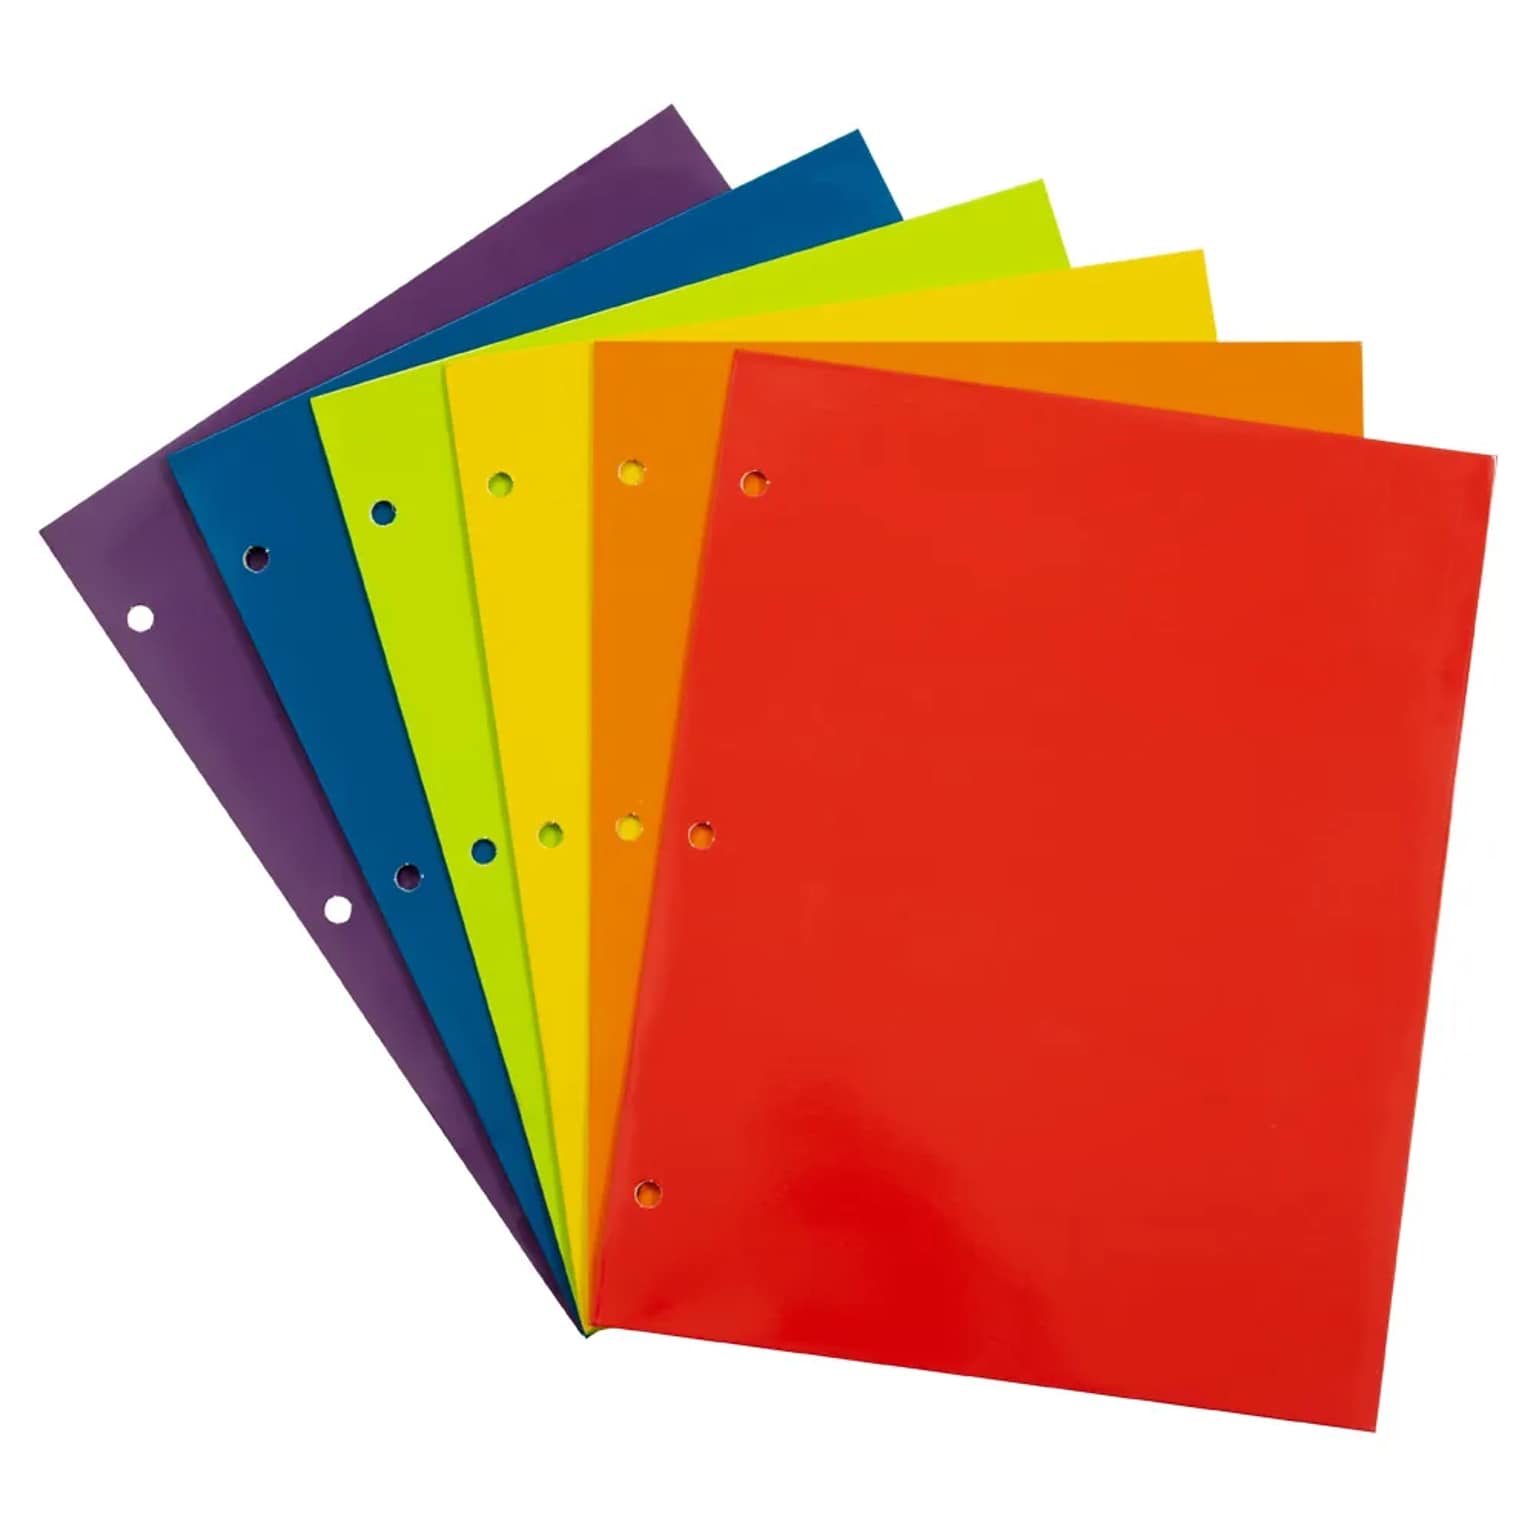 JAM Paper Glossy 3 Hole Punched, 2-Pocket Plastic Folders, Multicolored, Assorted Primary, 12/Pack (385GHPRBYPOBLA)